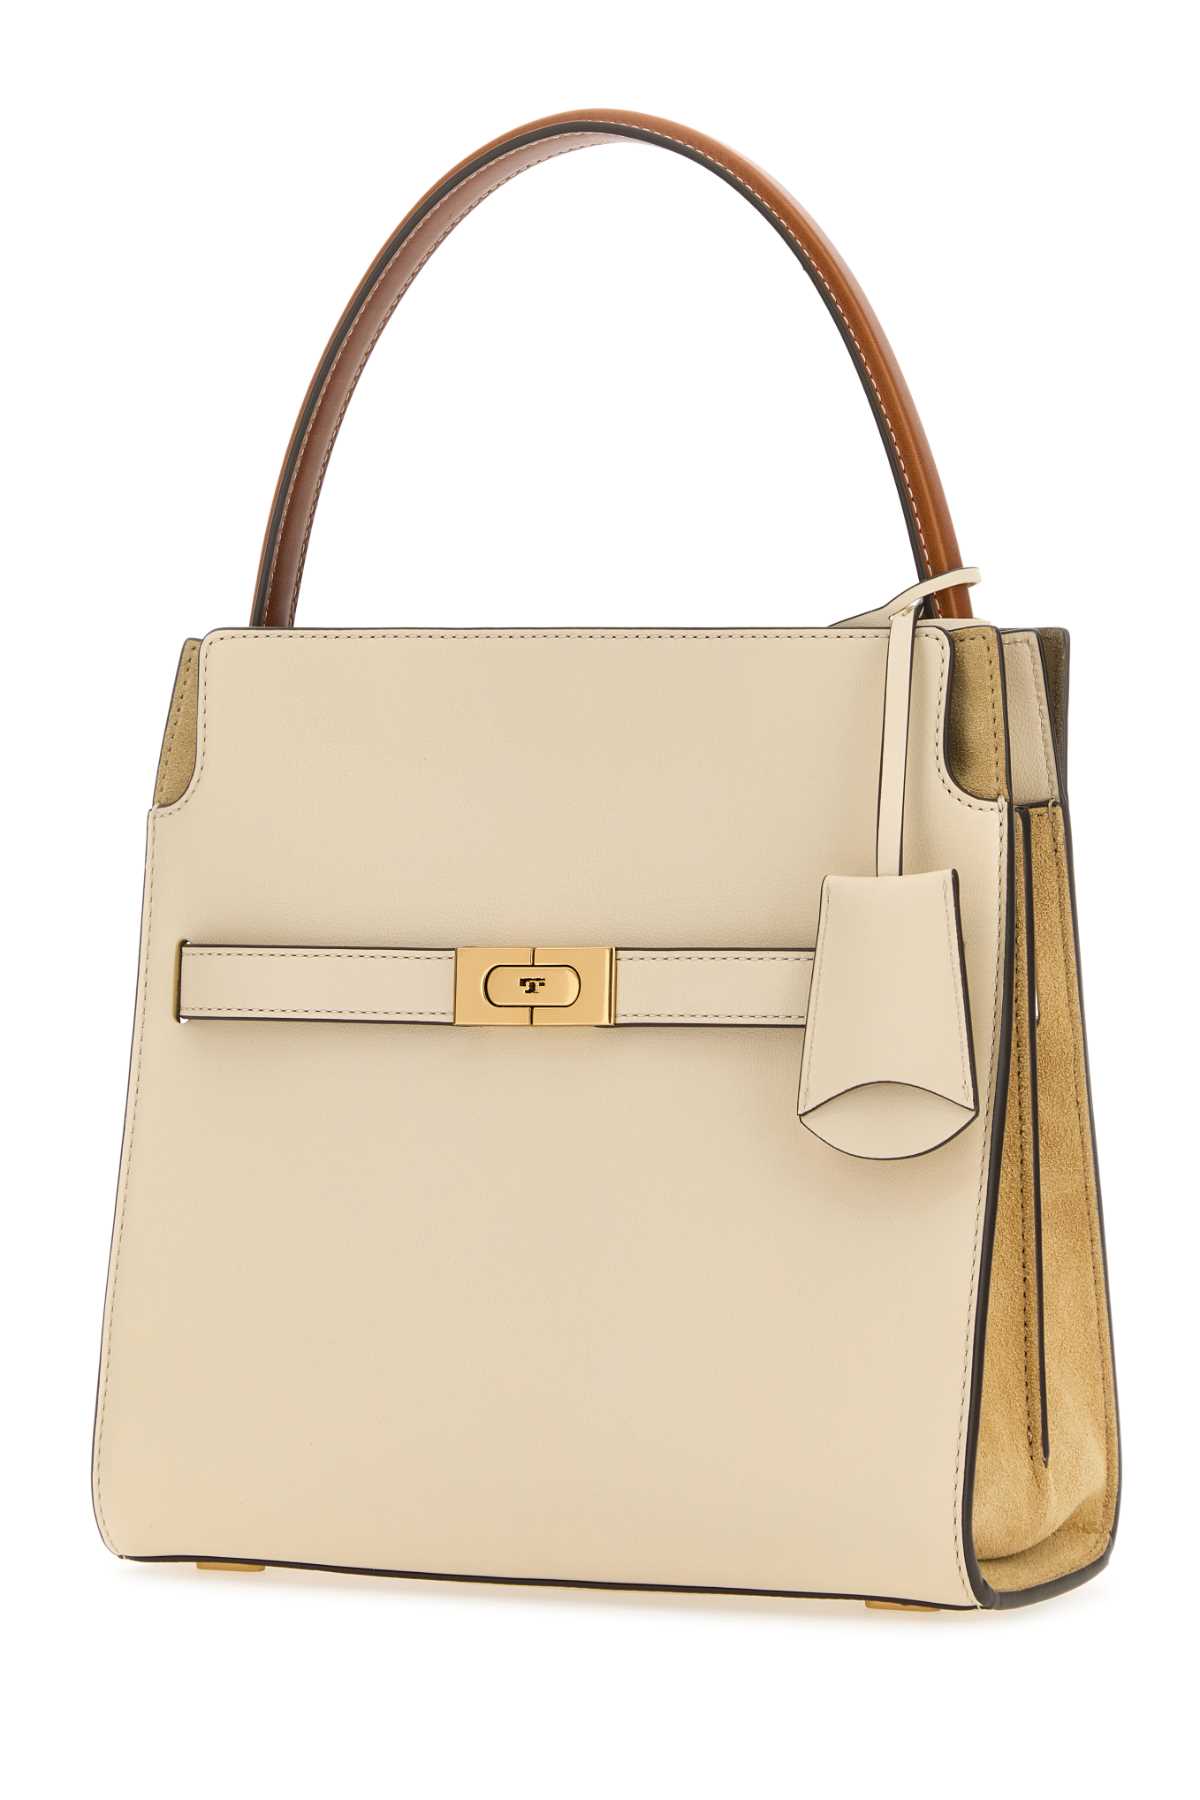 Tory Burch Small Double Lee Radziwill Shoulder Bag In Newcream